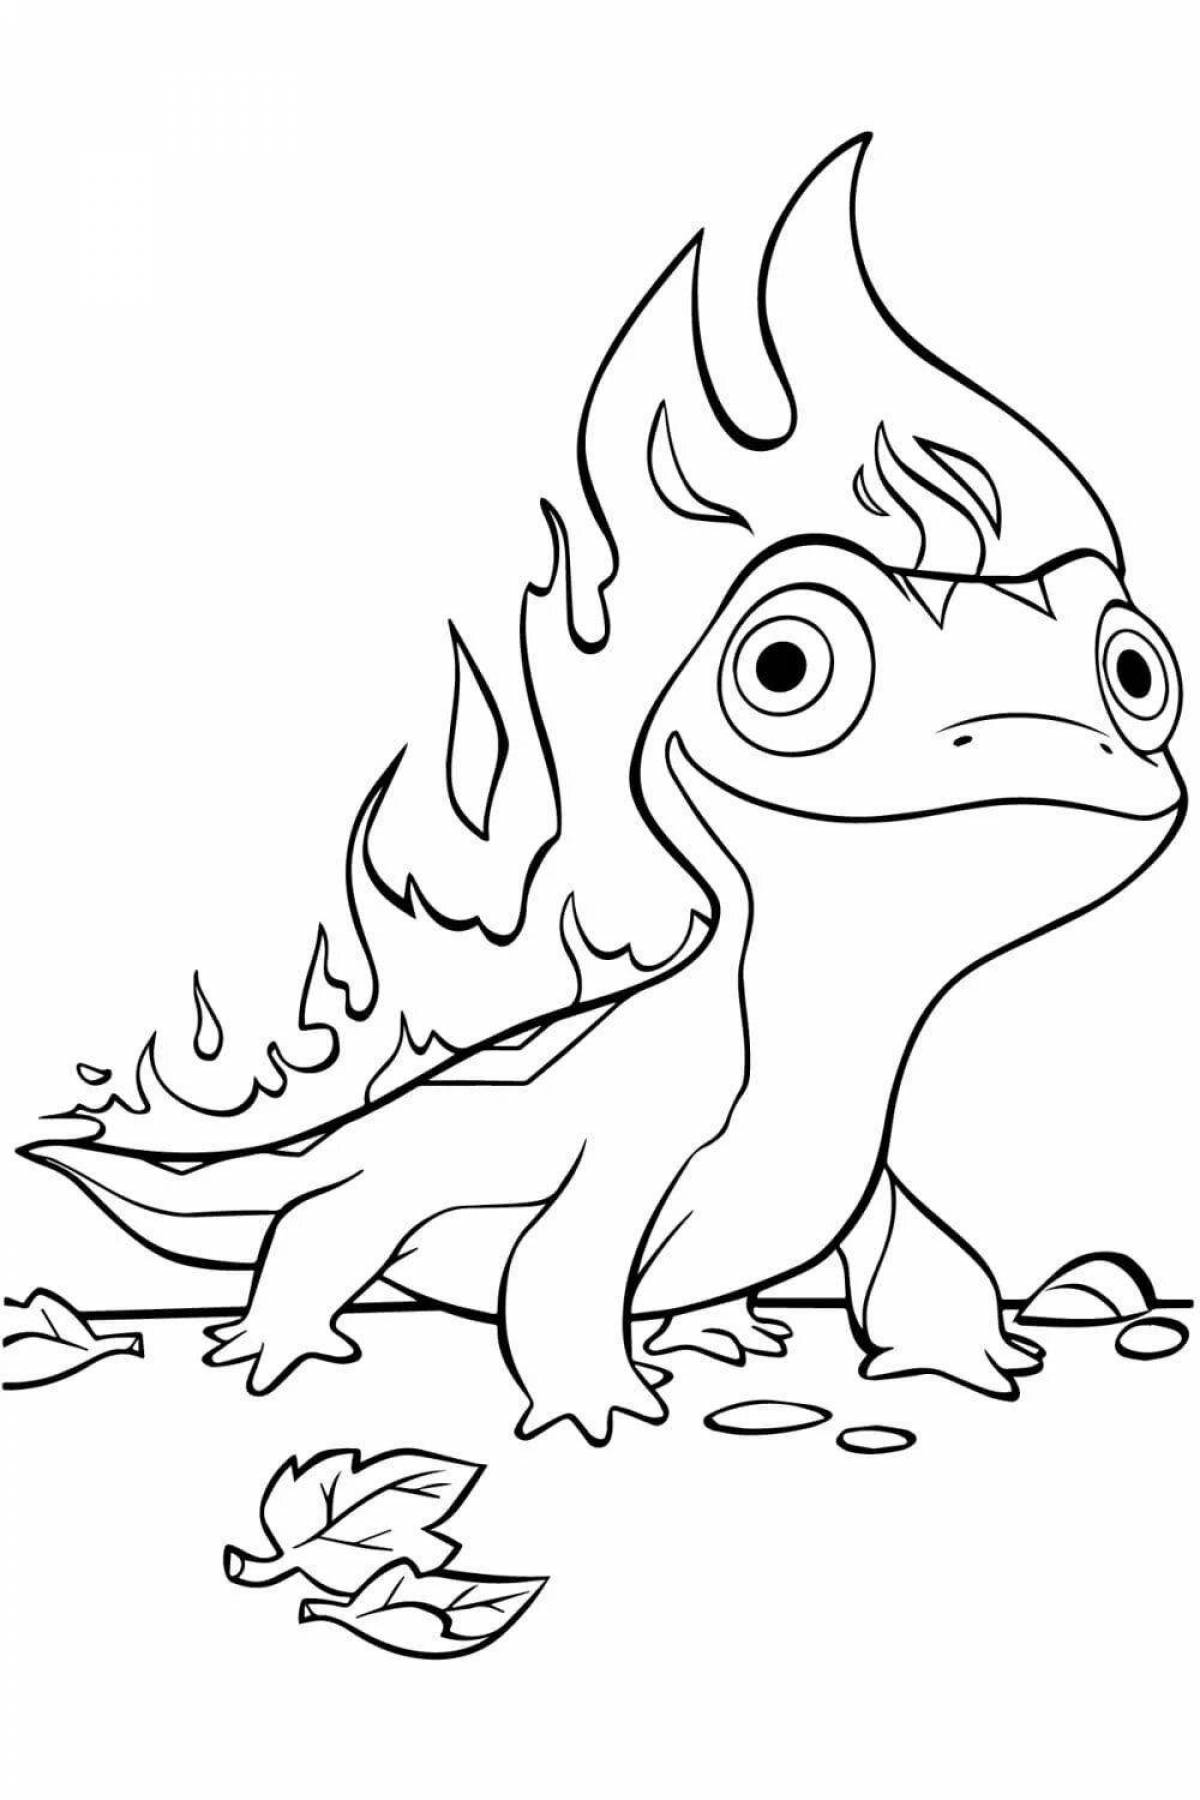 Flashing fire and water coloring page